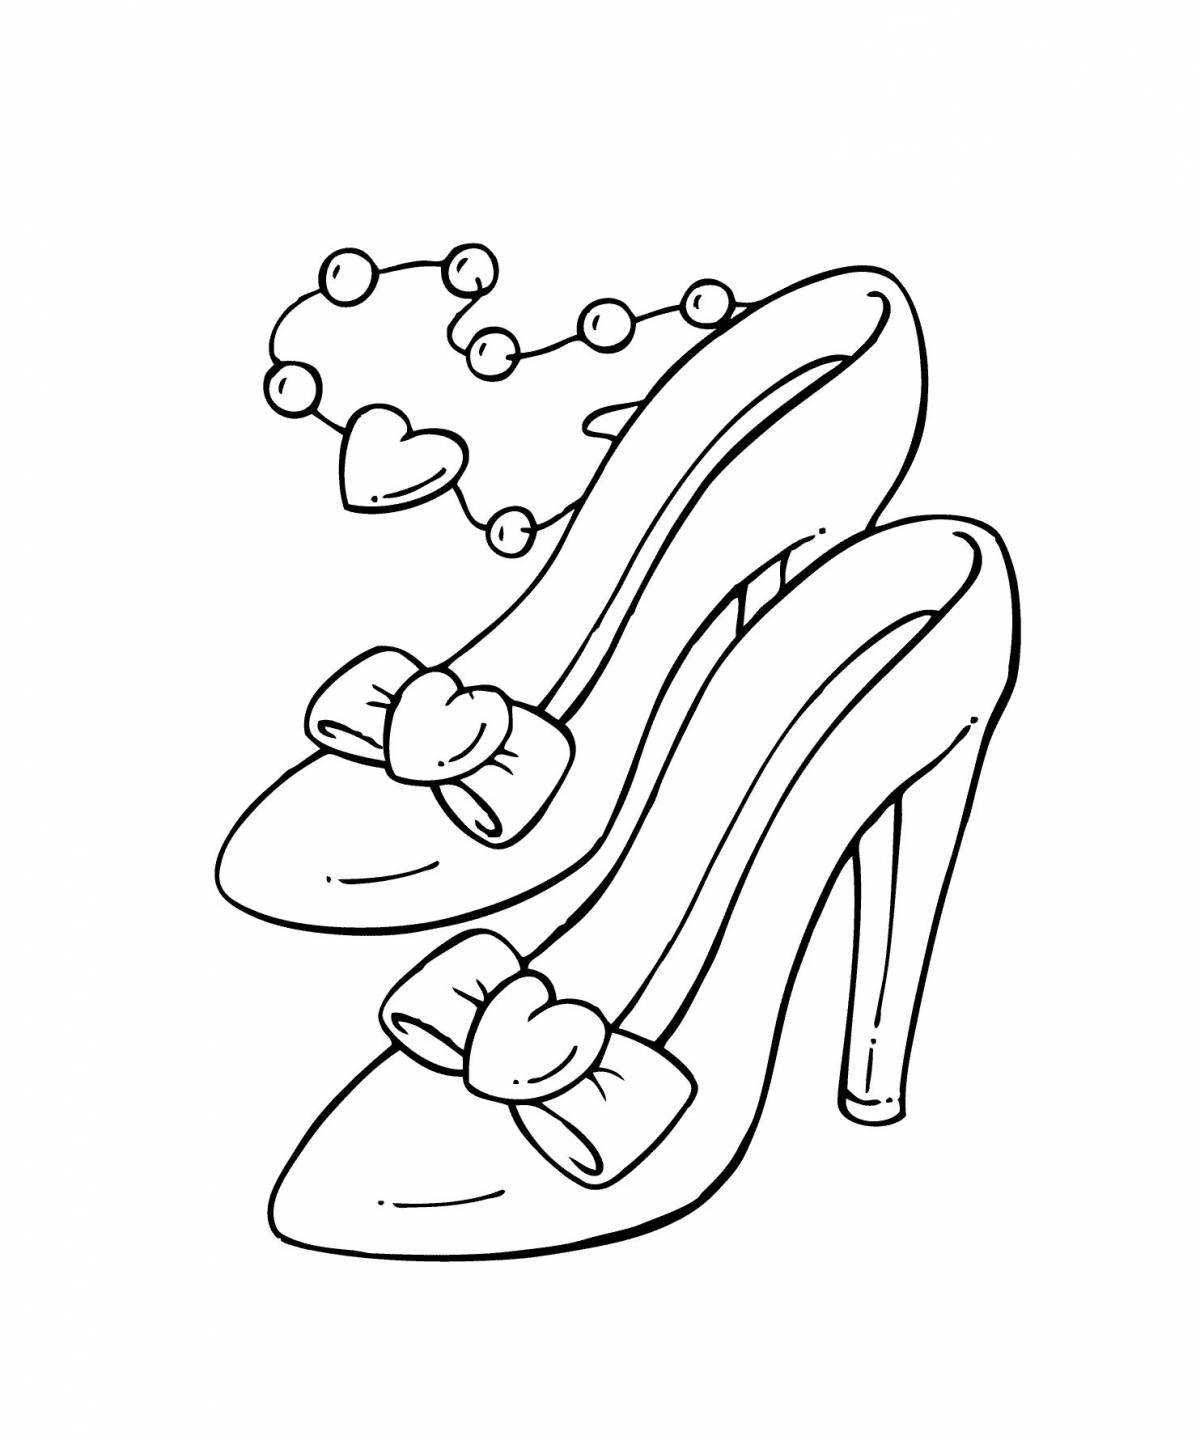 Coloring fairy shoes for girls